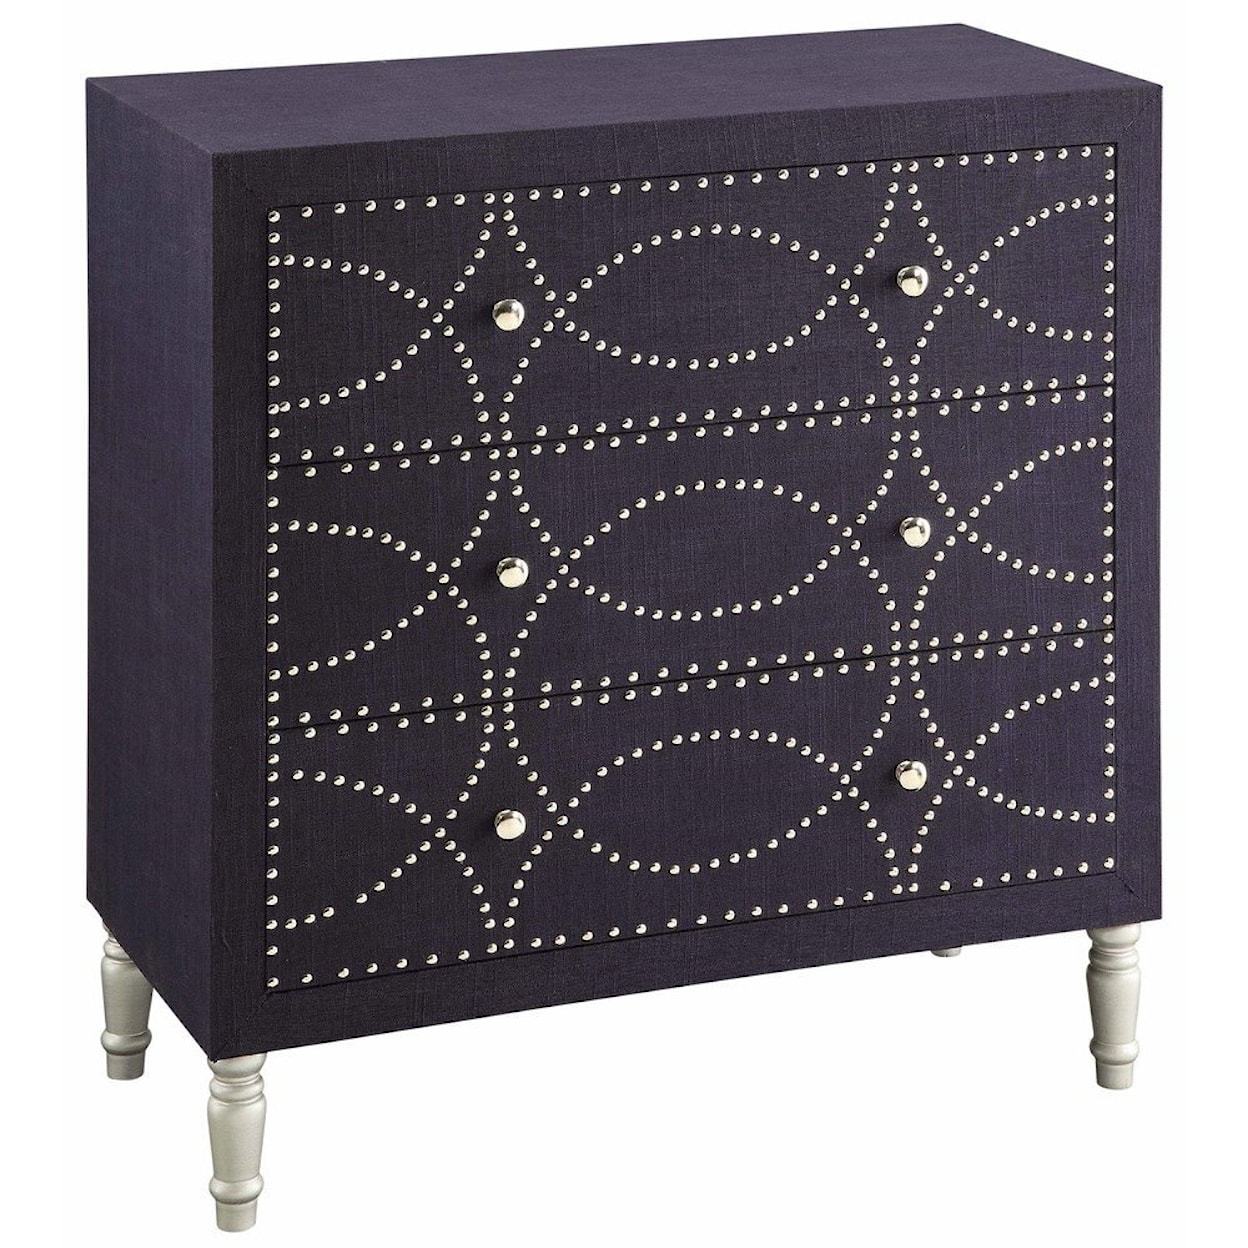 Crestview Collection Accent Furniture Cobalt Blue Fabric And Chrome Nailhead 3 Dra